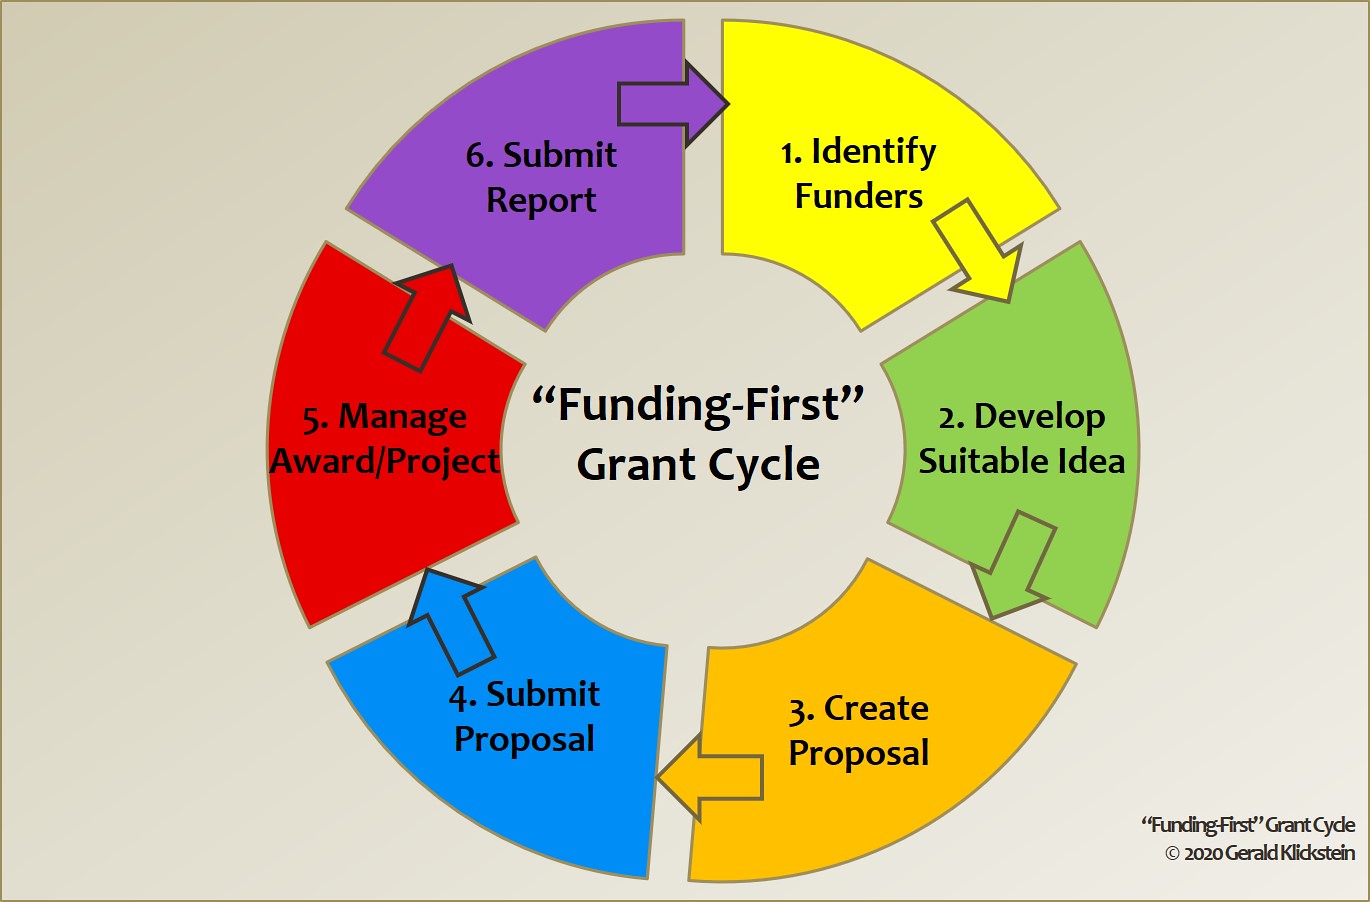 Funding-First Grant Cycle by Gerald Klickstein